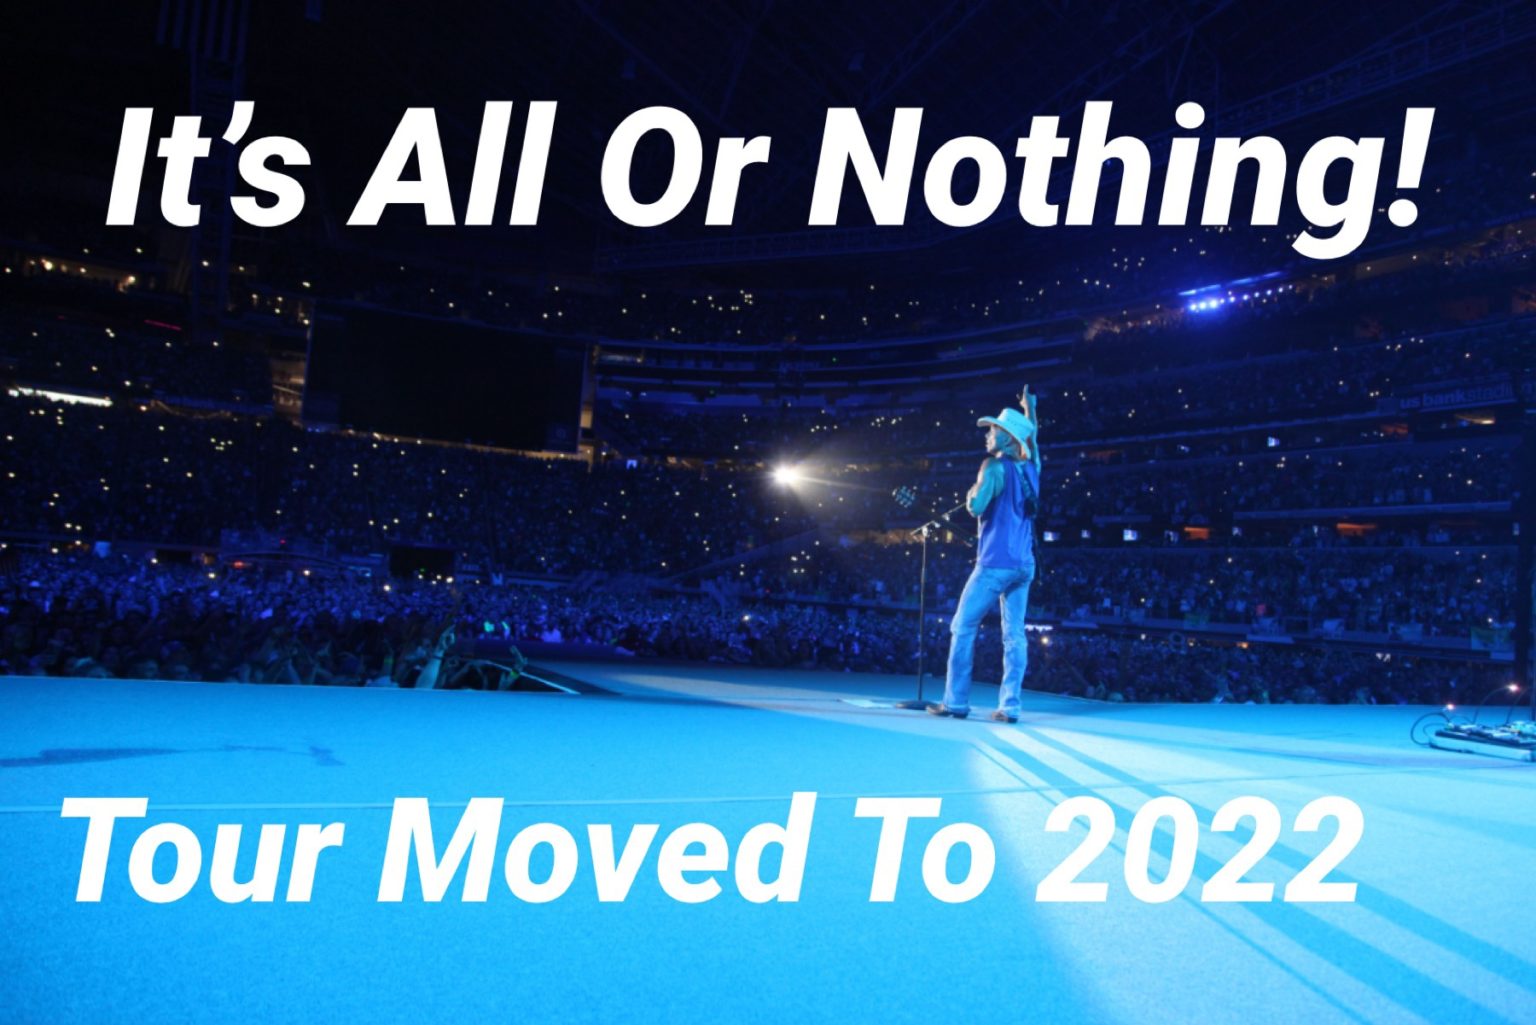 “Kenny Chesney Moves Tour to 2022” | Welcome to the Sandbar